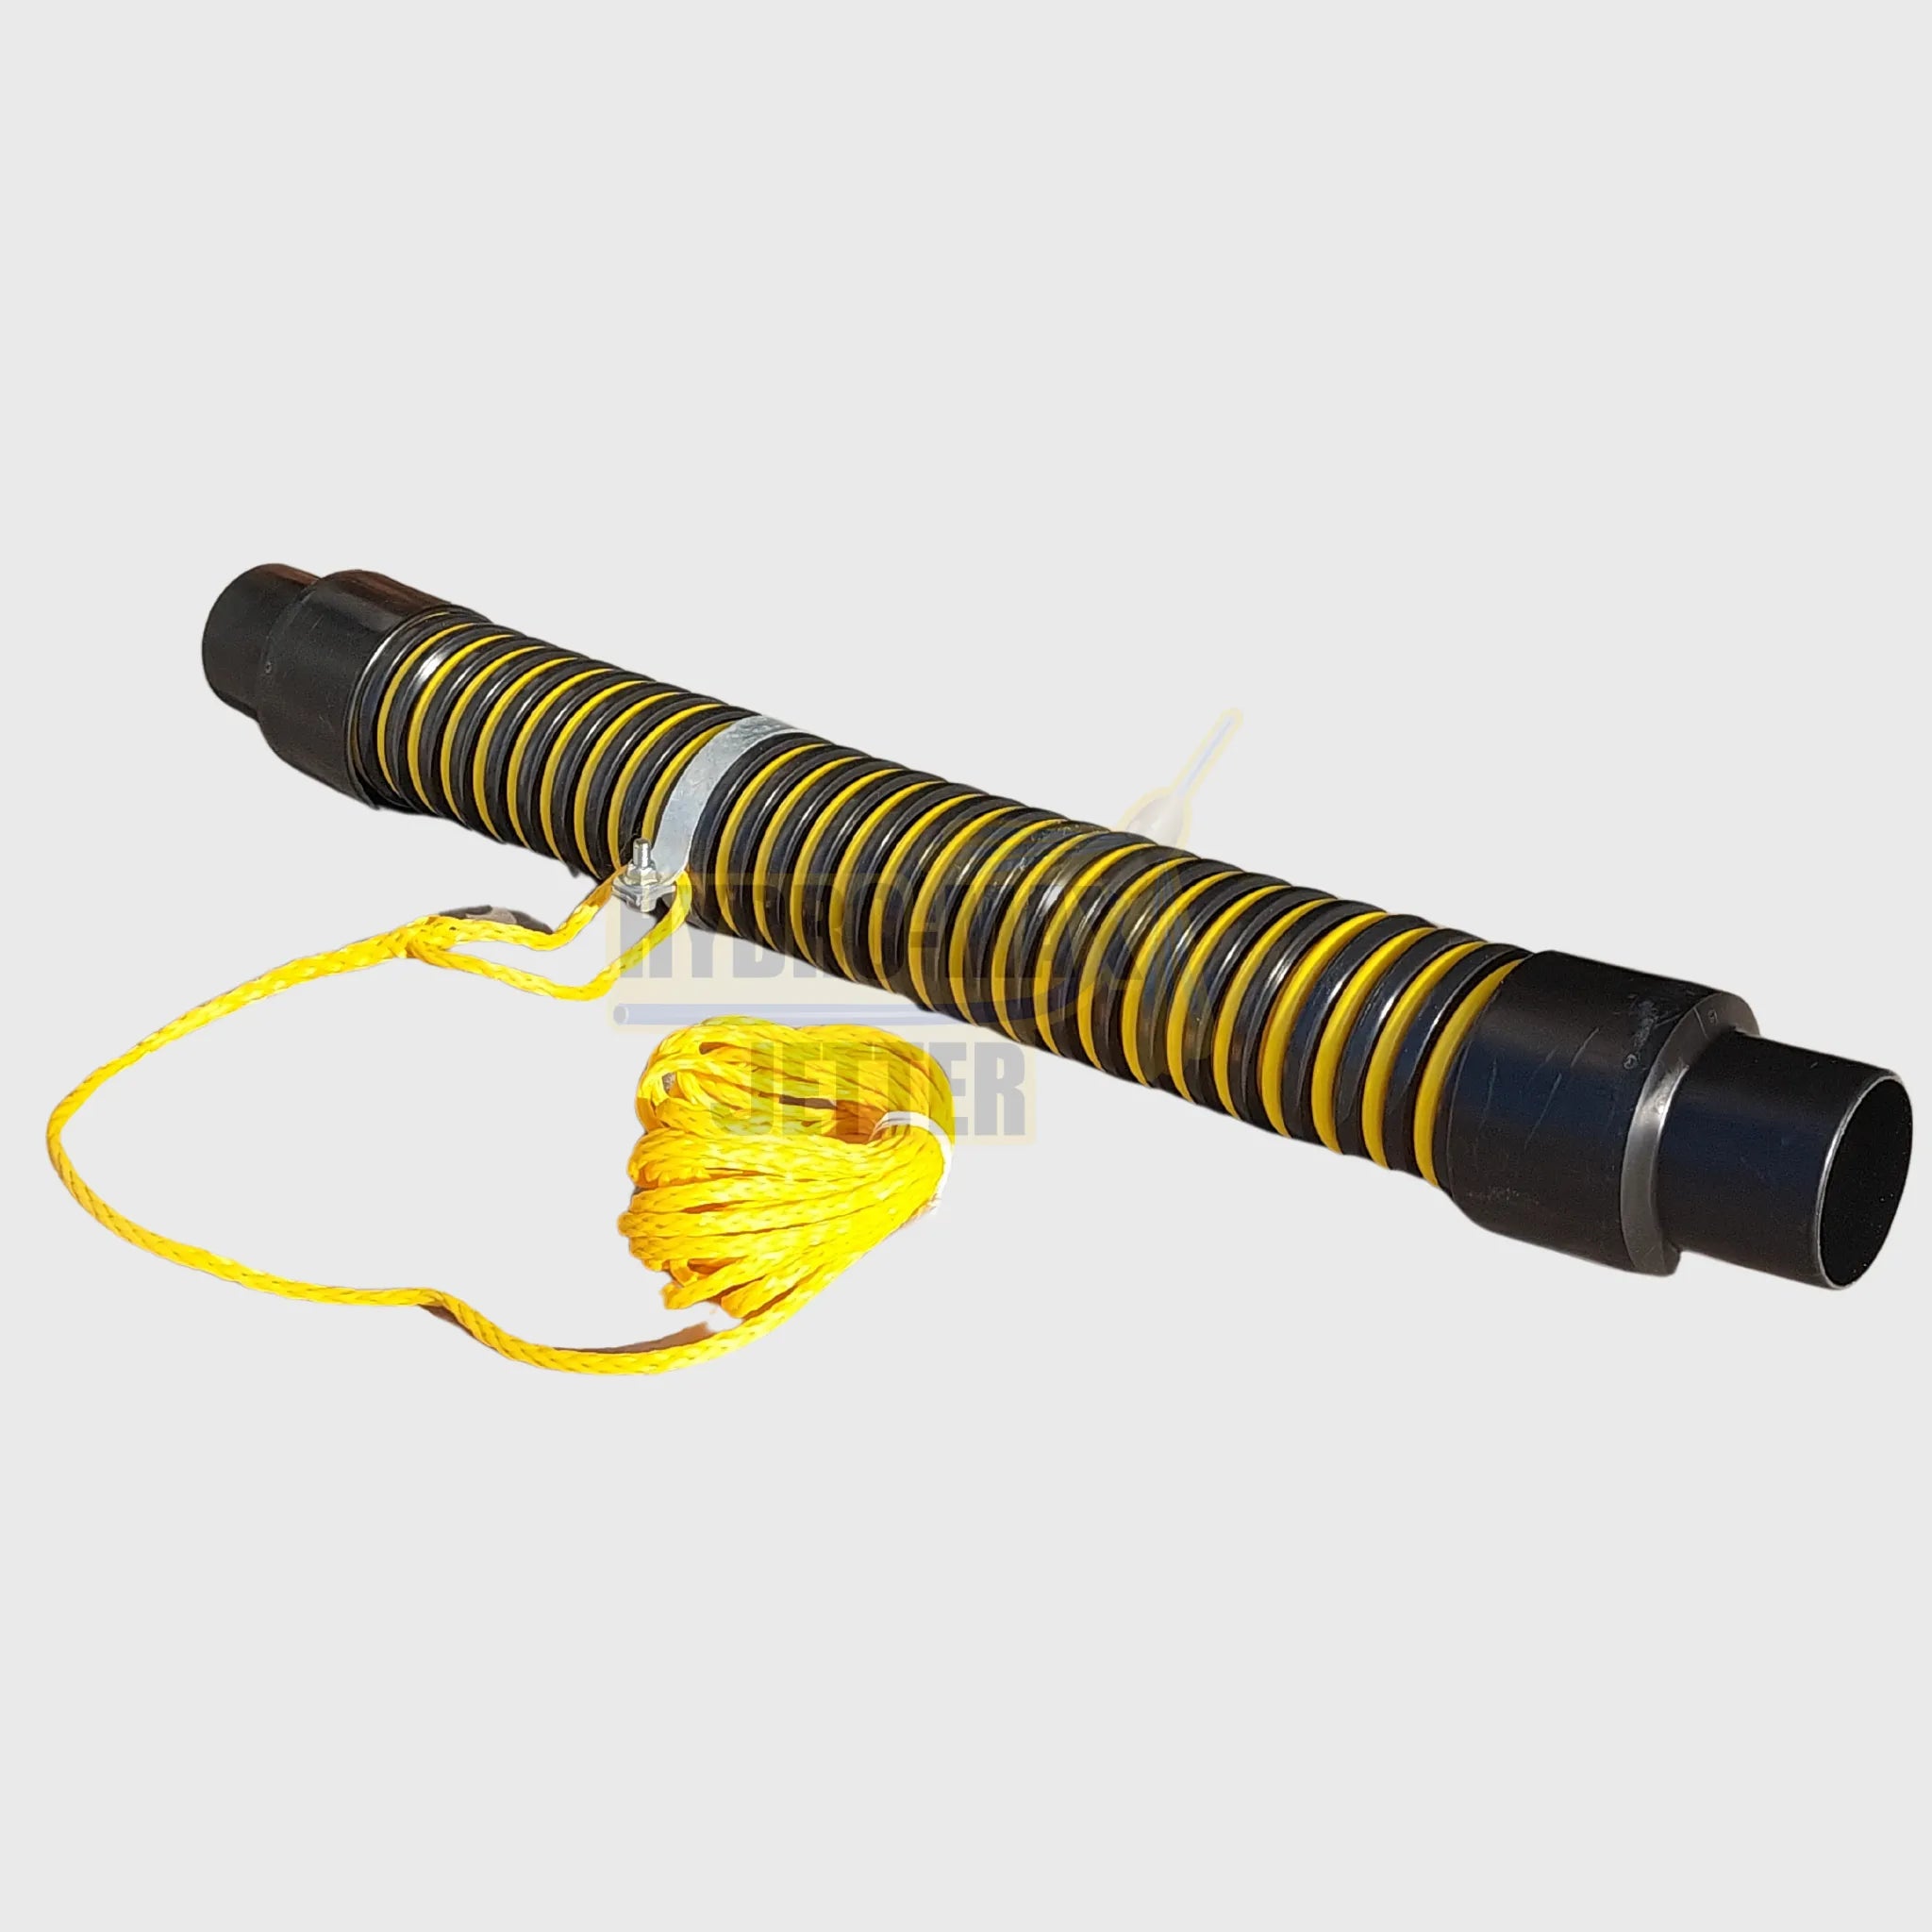 Tyger-Tail® Sewer Hose Guide w/24' Rope (Tiger)